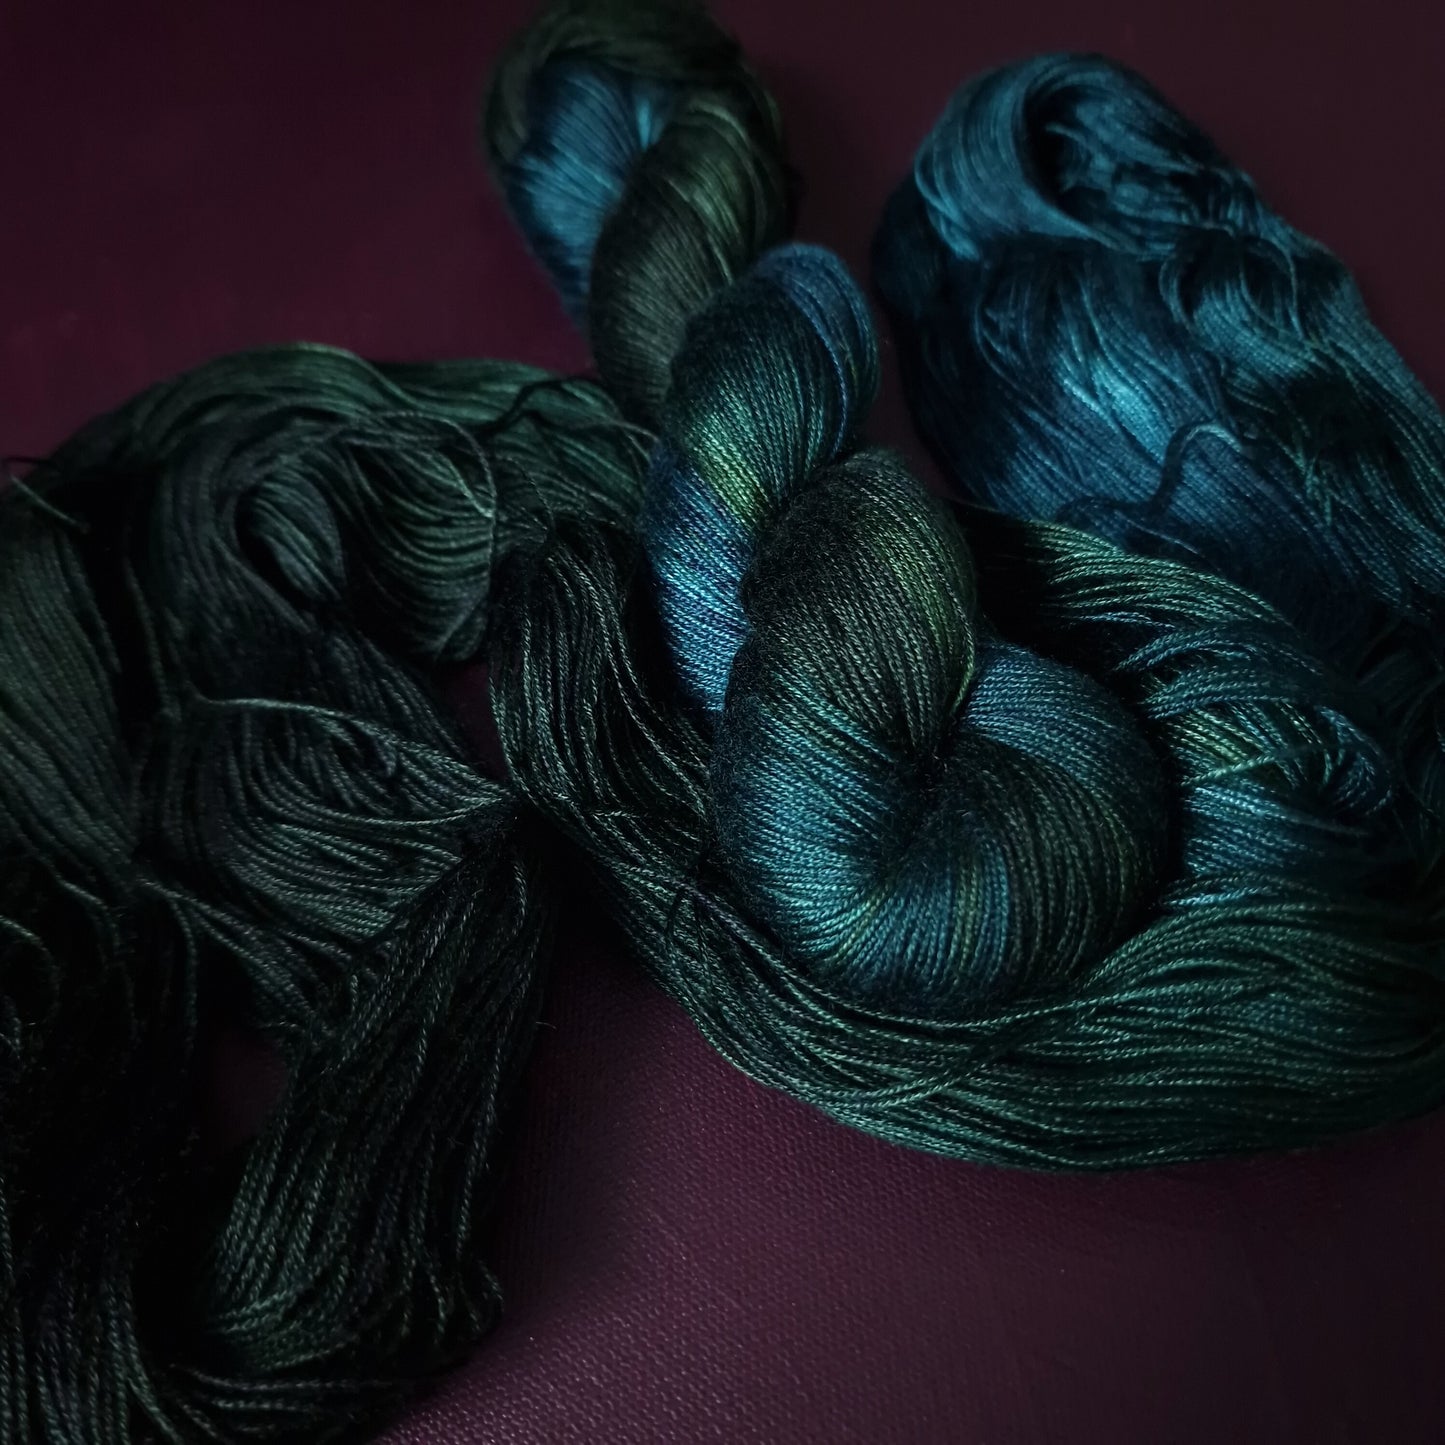 Hand dyed yarn ~ Midnight Sea***Dyed to order ~ fingering / DK weight tencel OR bamboo yarn, vegan, hand painted